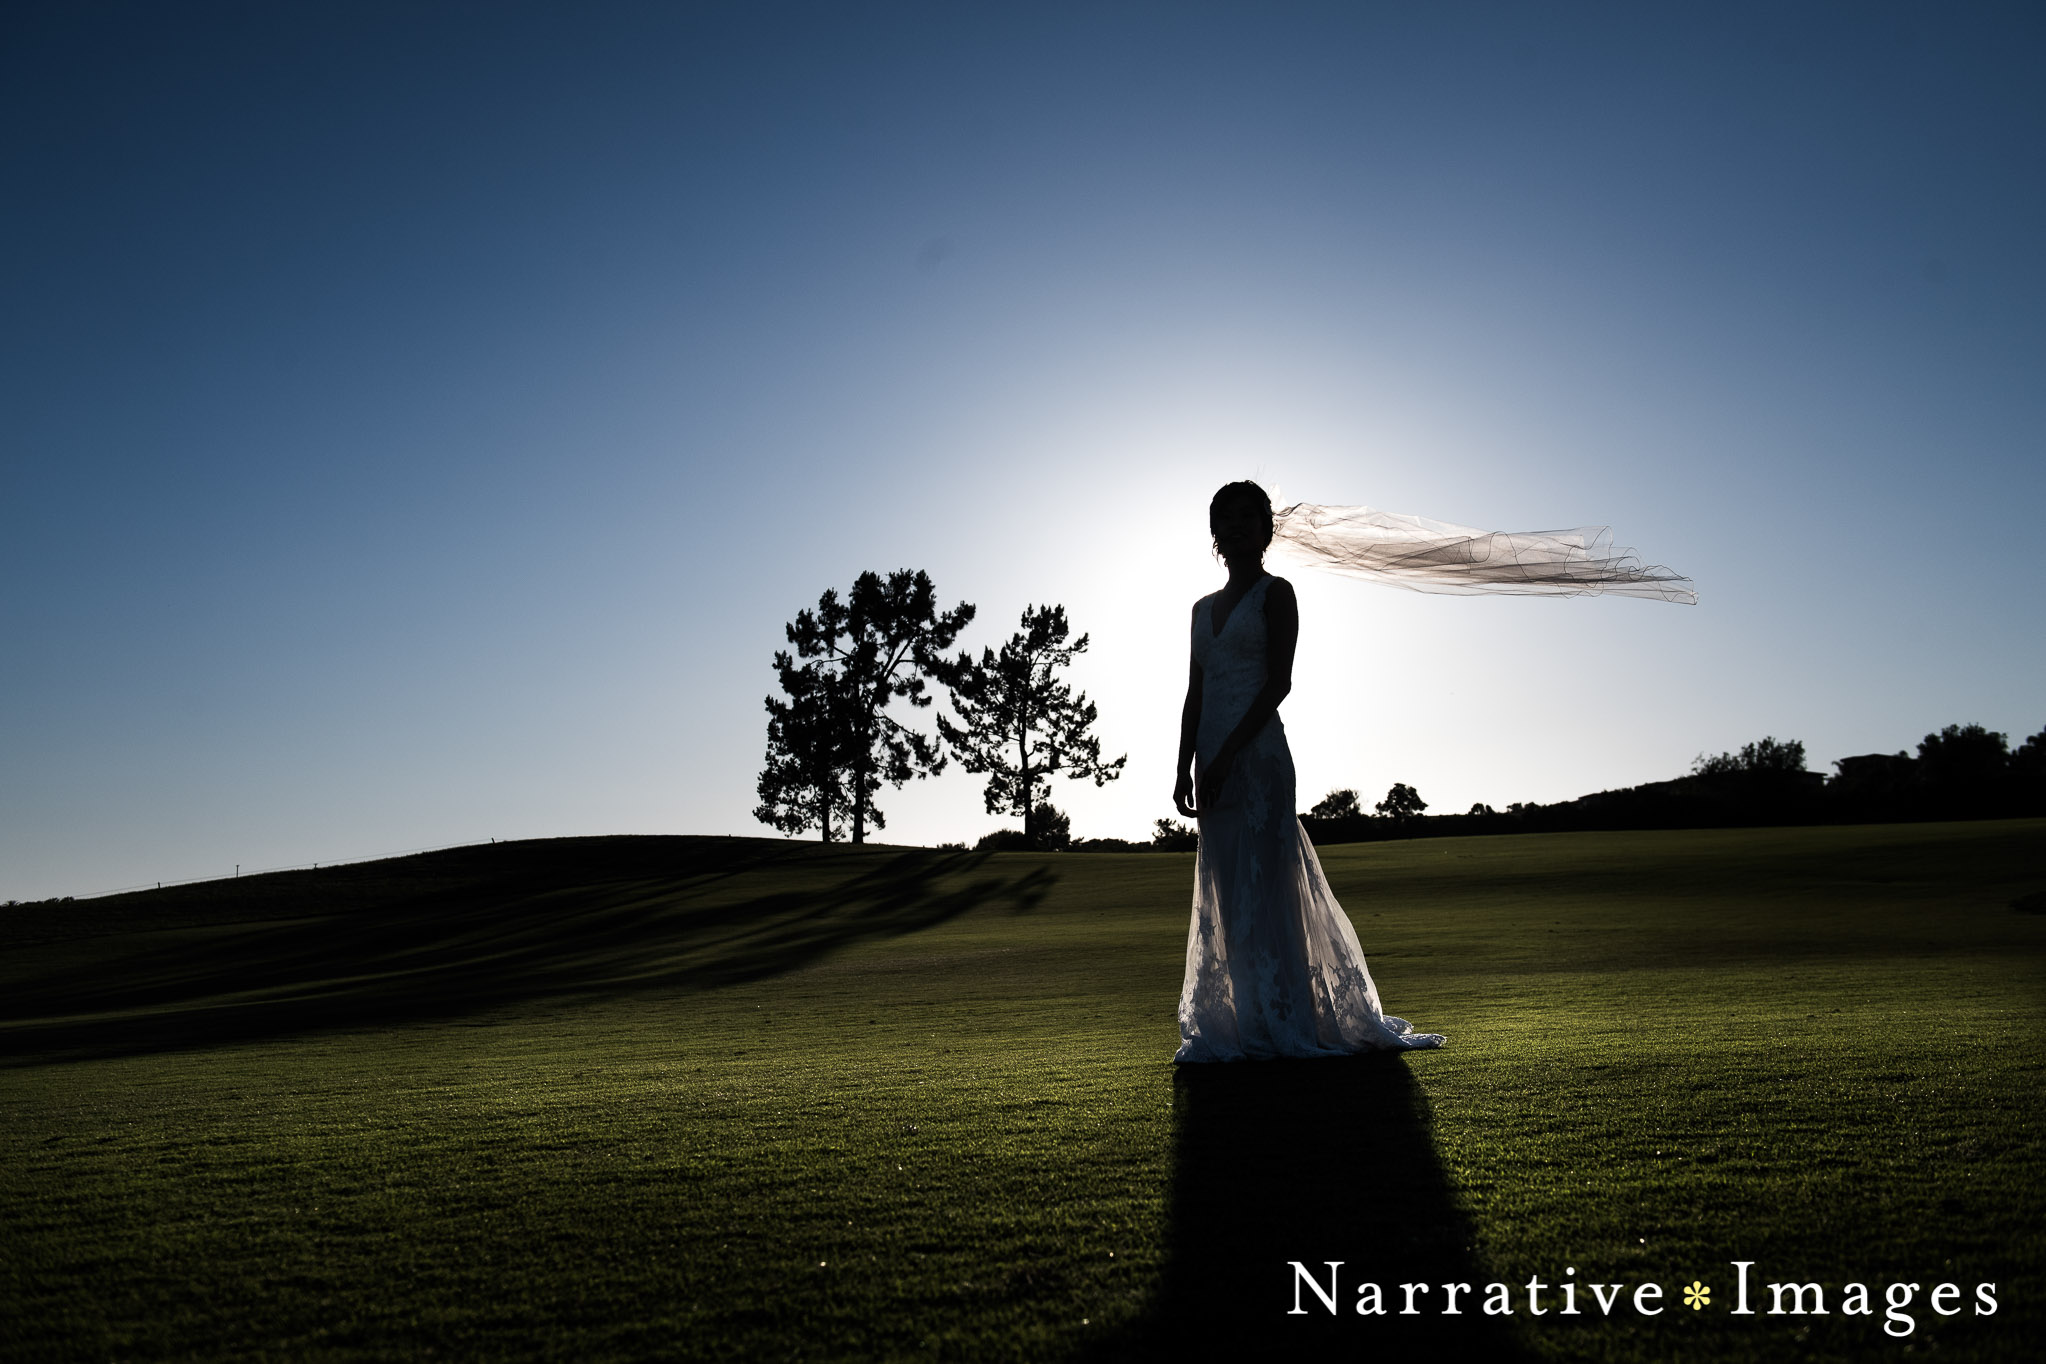 Bridal portrait on golf course sillhoette with veil blowing in wind